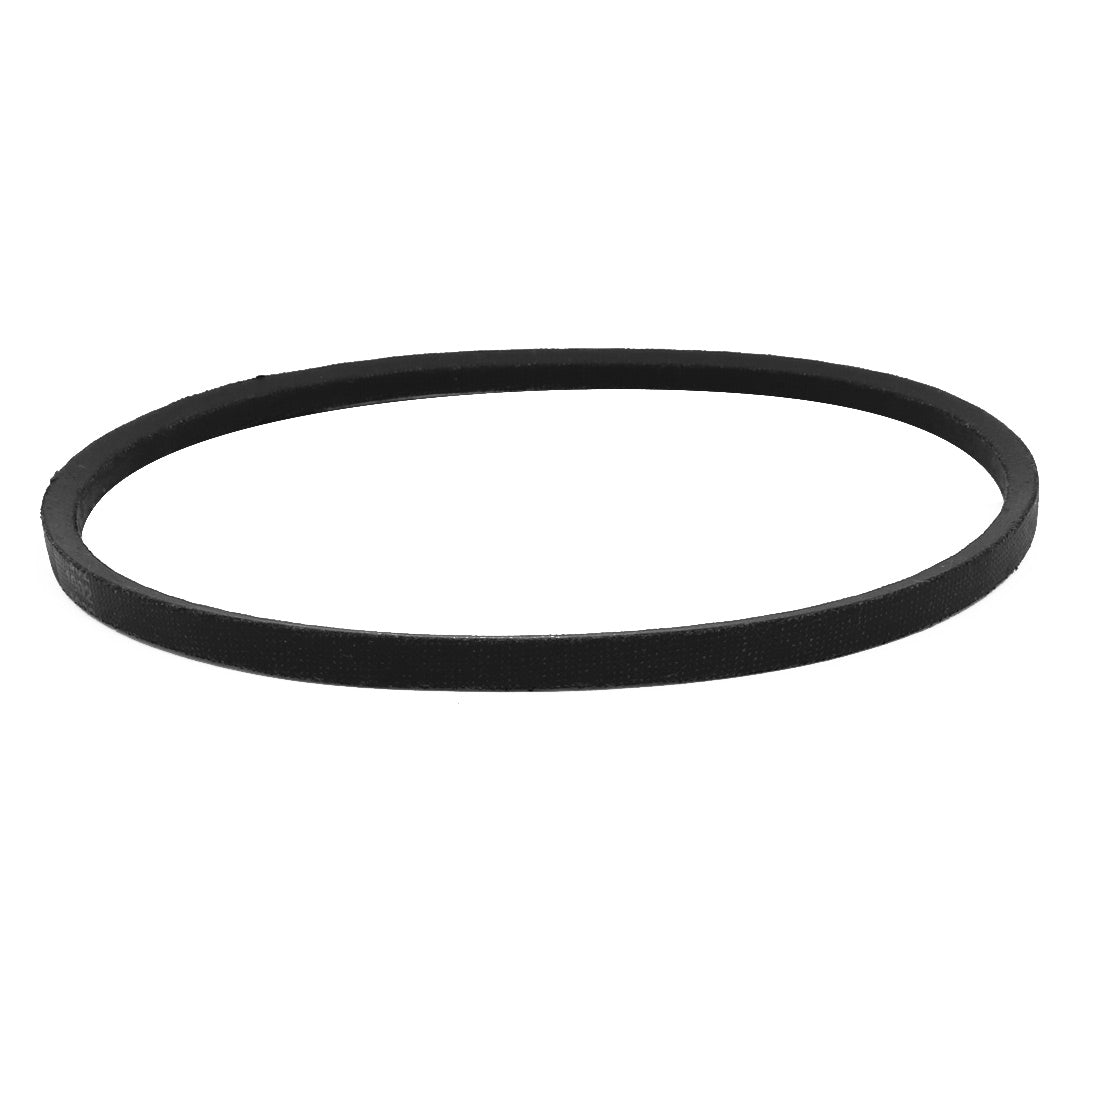 uxcell Uxcell O-510 Rubber Transmission Drive Belt V-Belt 10mm Wide 6mm Thick for Washing Machine